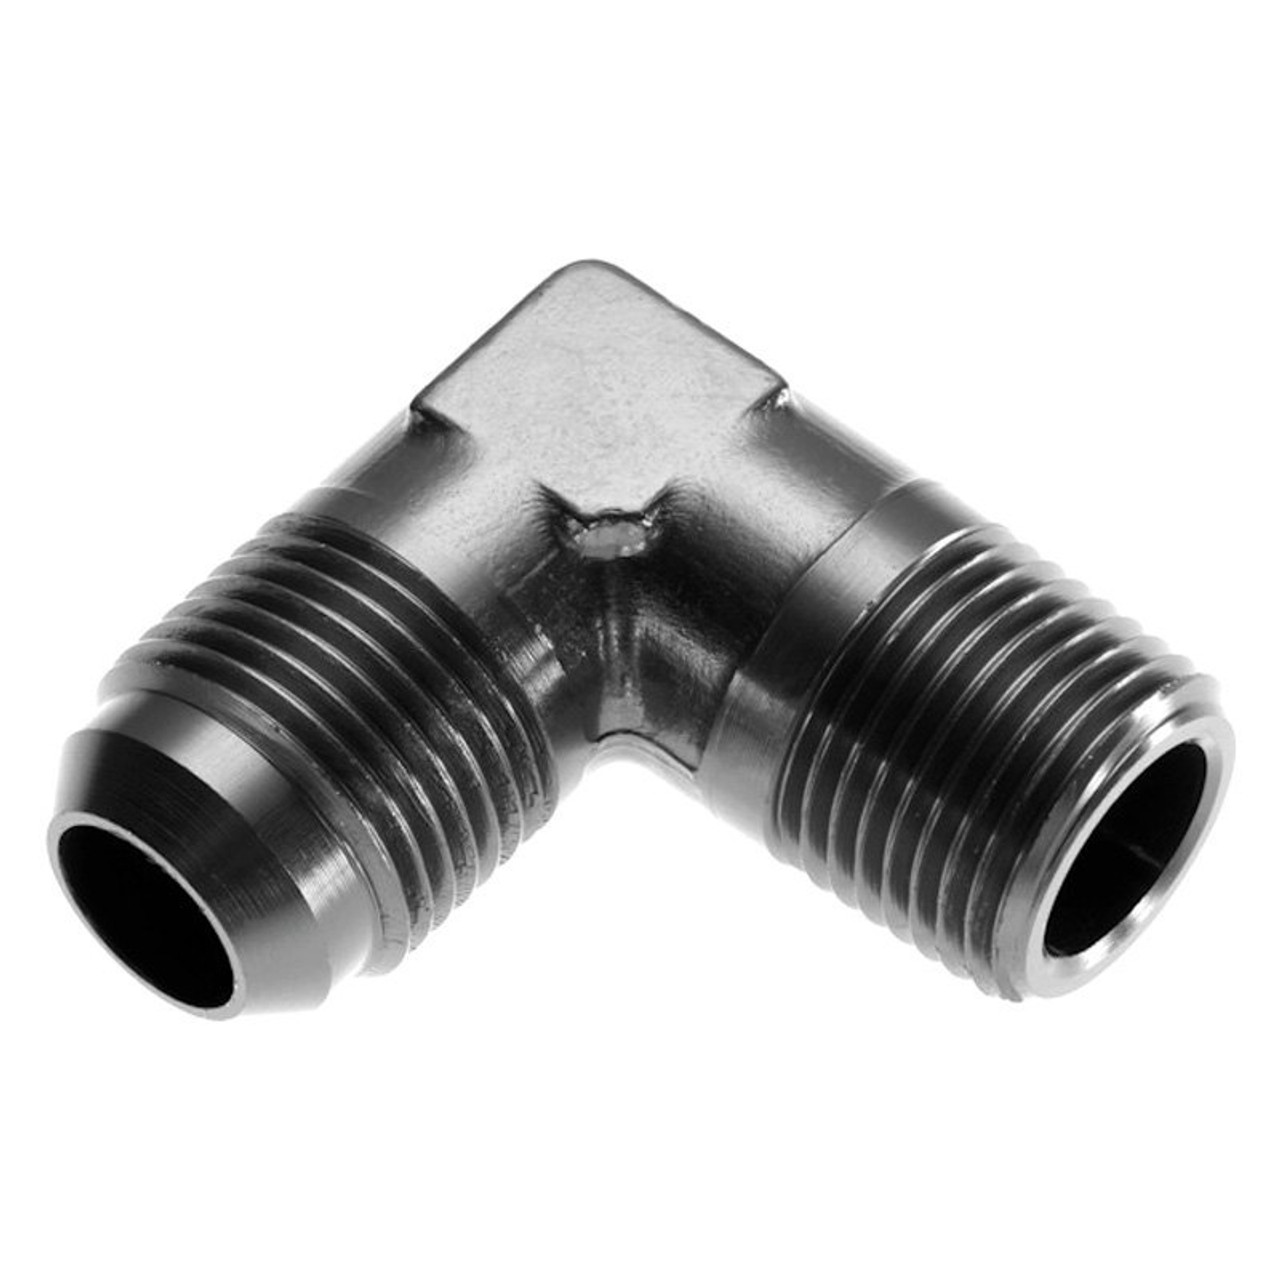 RHP822-03-02-2, AN to NPT Adapter  -03 90 degree male adapter to -02 (1/8")